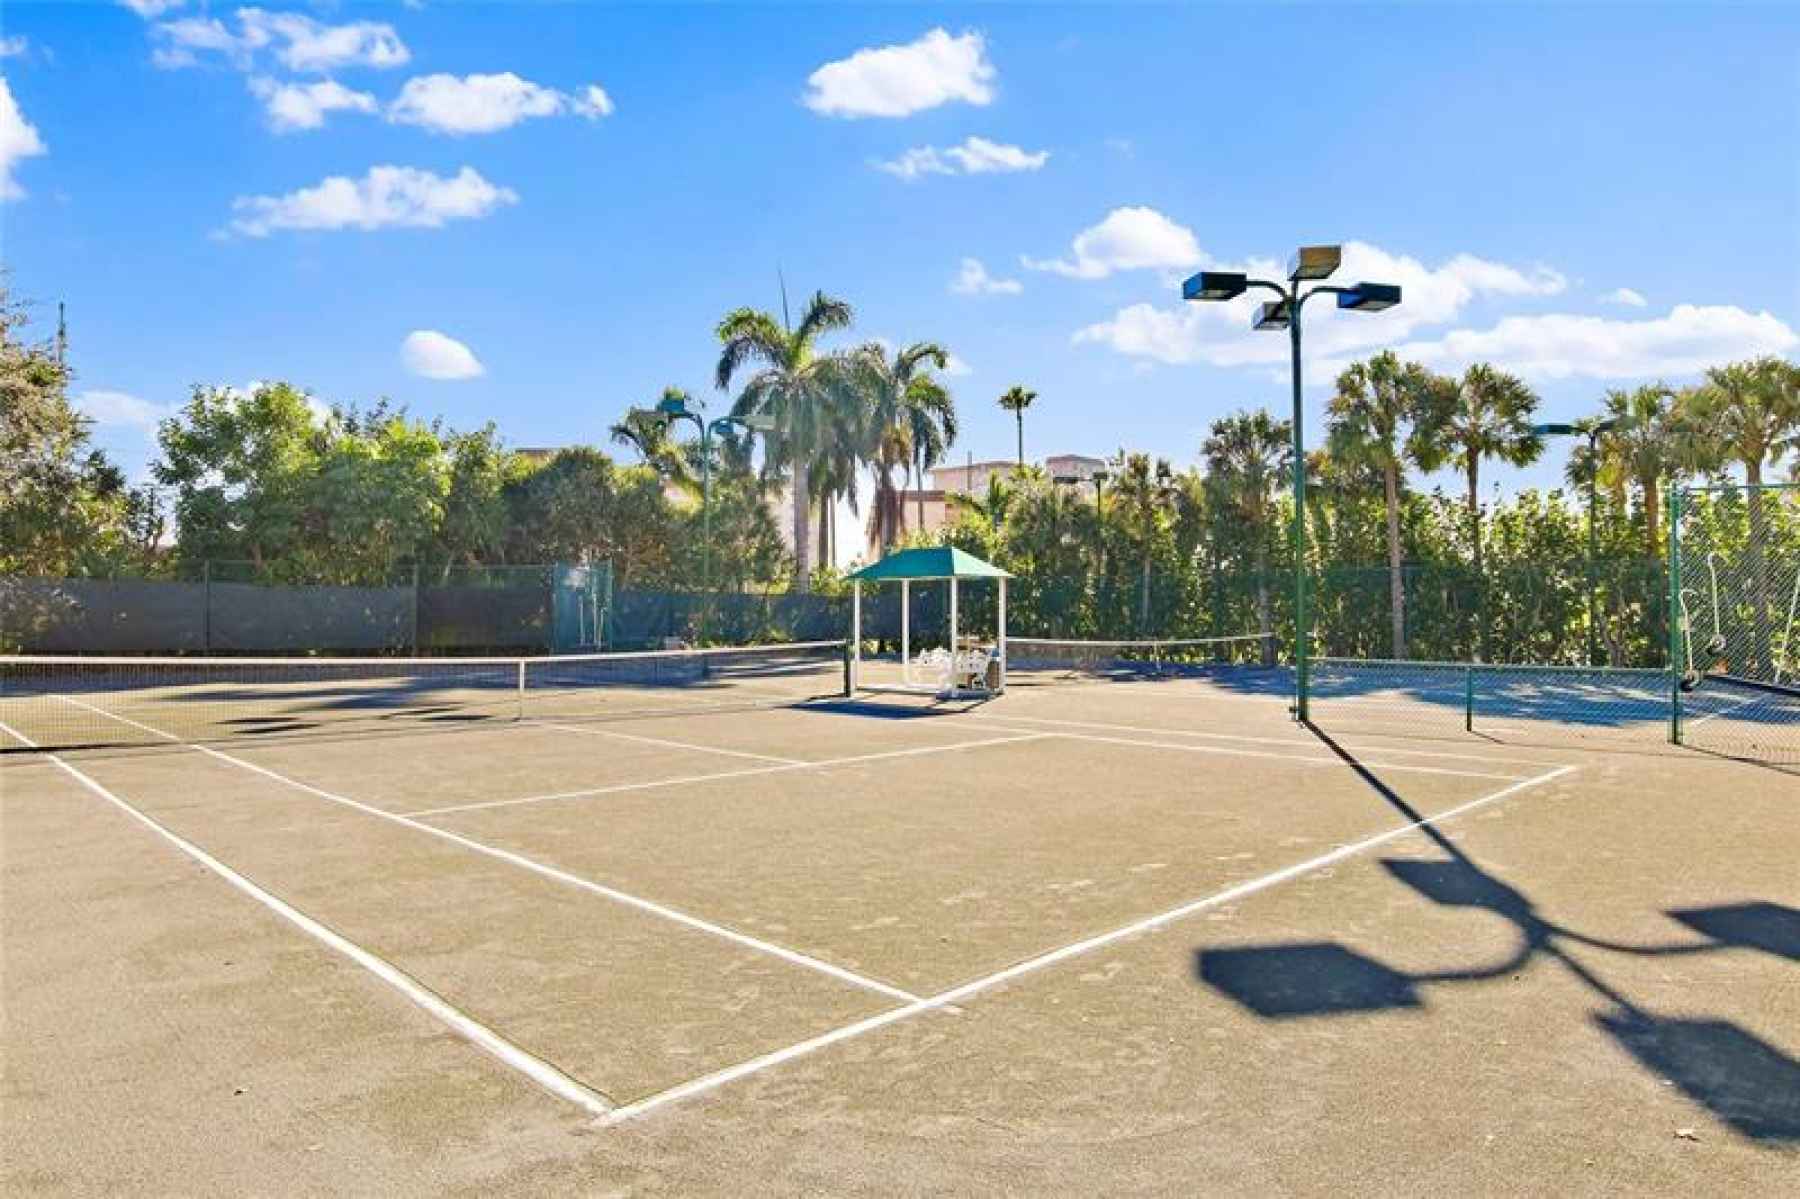 Lighted soft courts!  Fabulous!